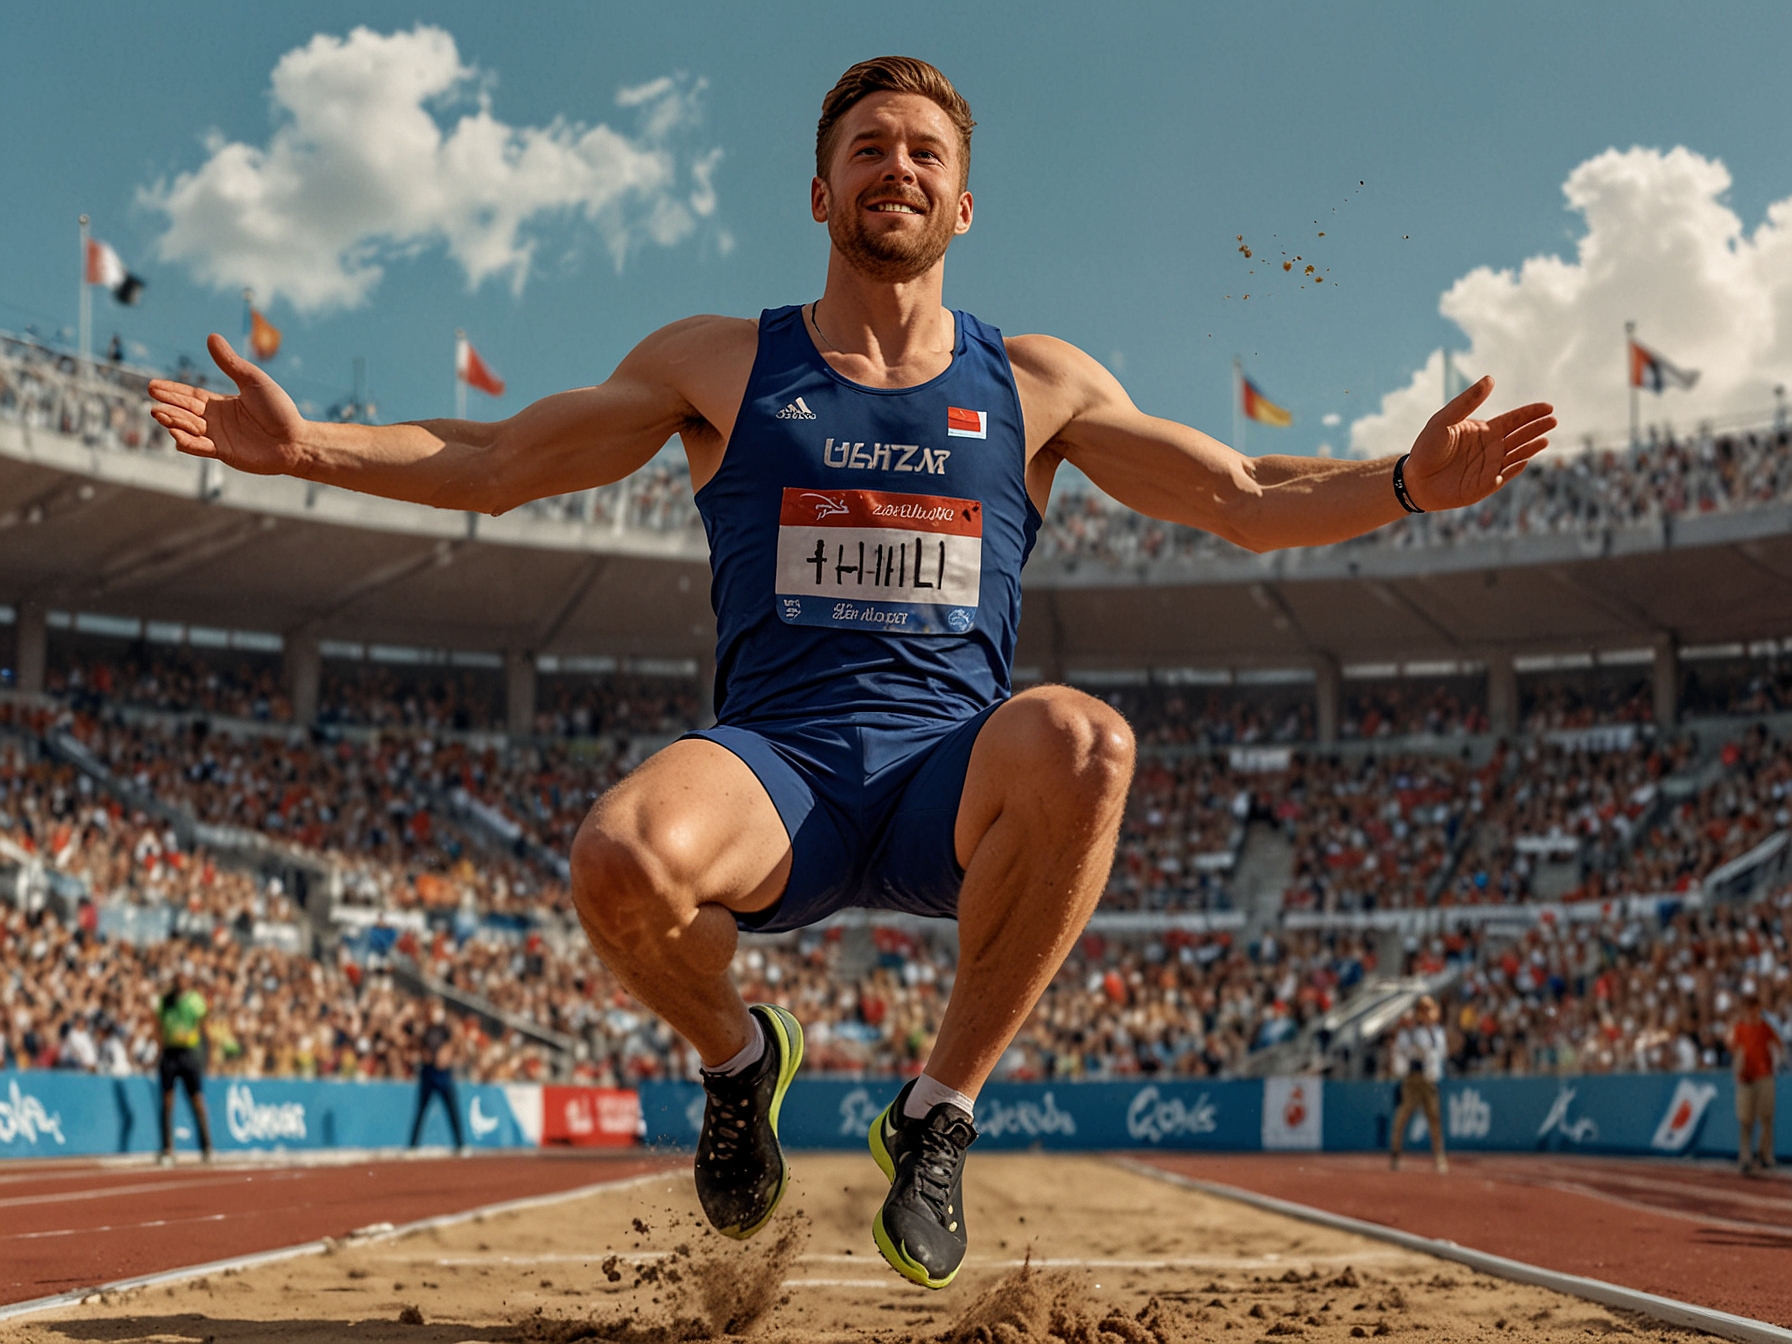 Matthew Hall performs a record-breaking long jump during the Olympic Qualifier Series in Budapest, dazzling spectators and earning his place in the 2024 Paris Olympics.